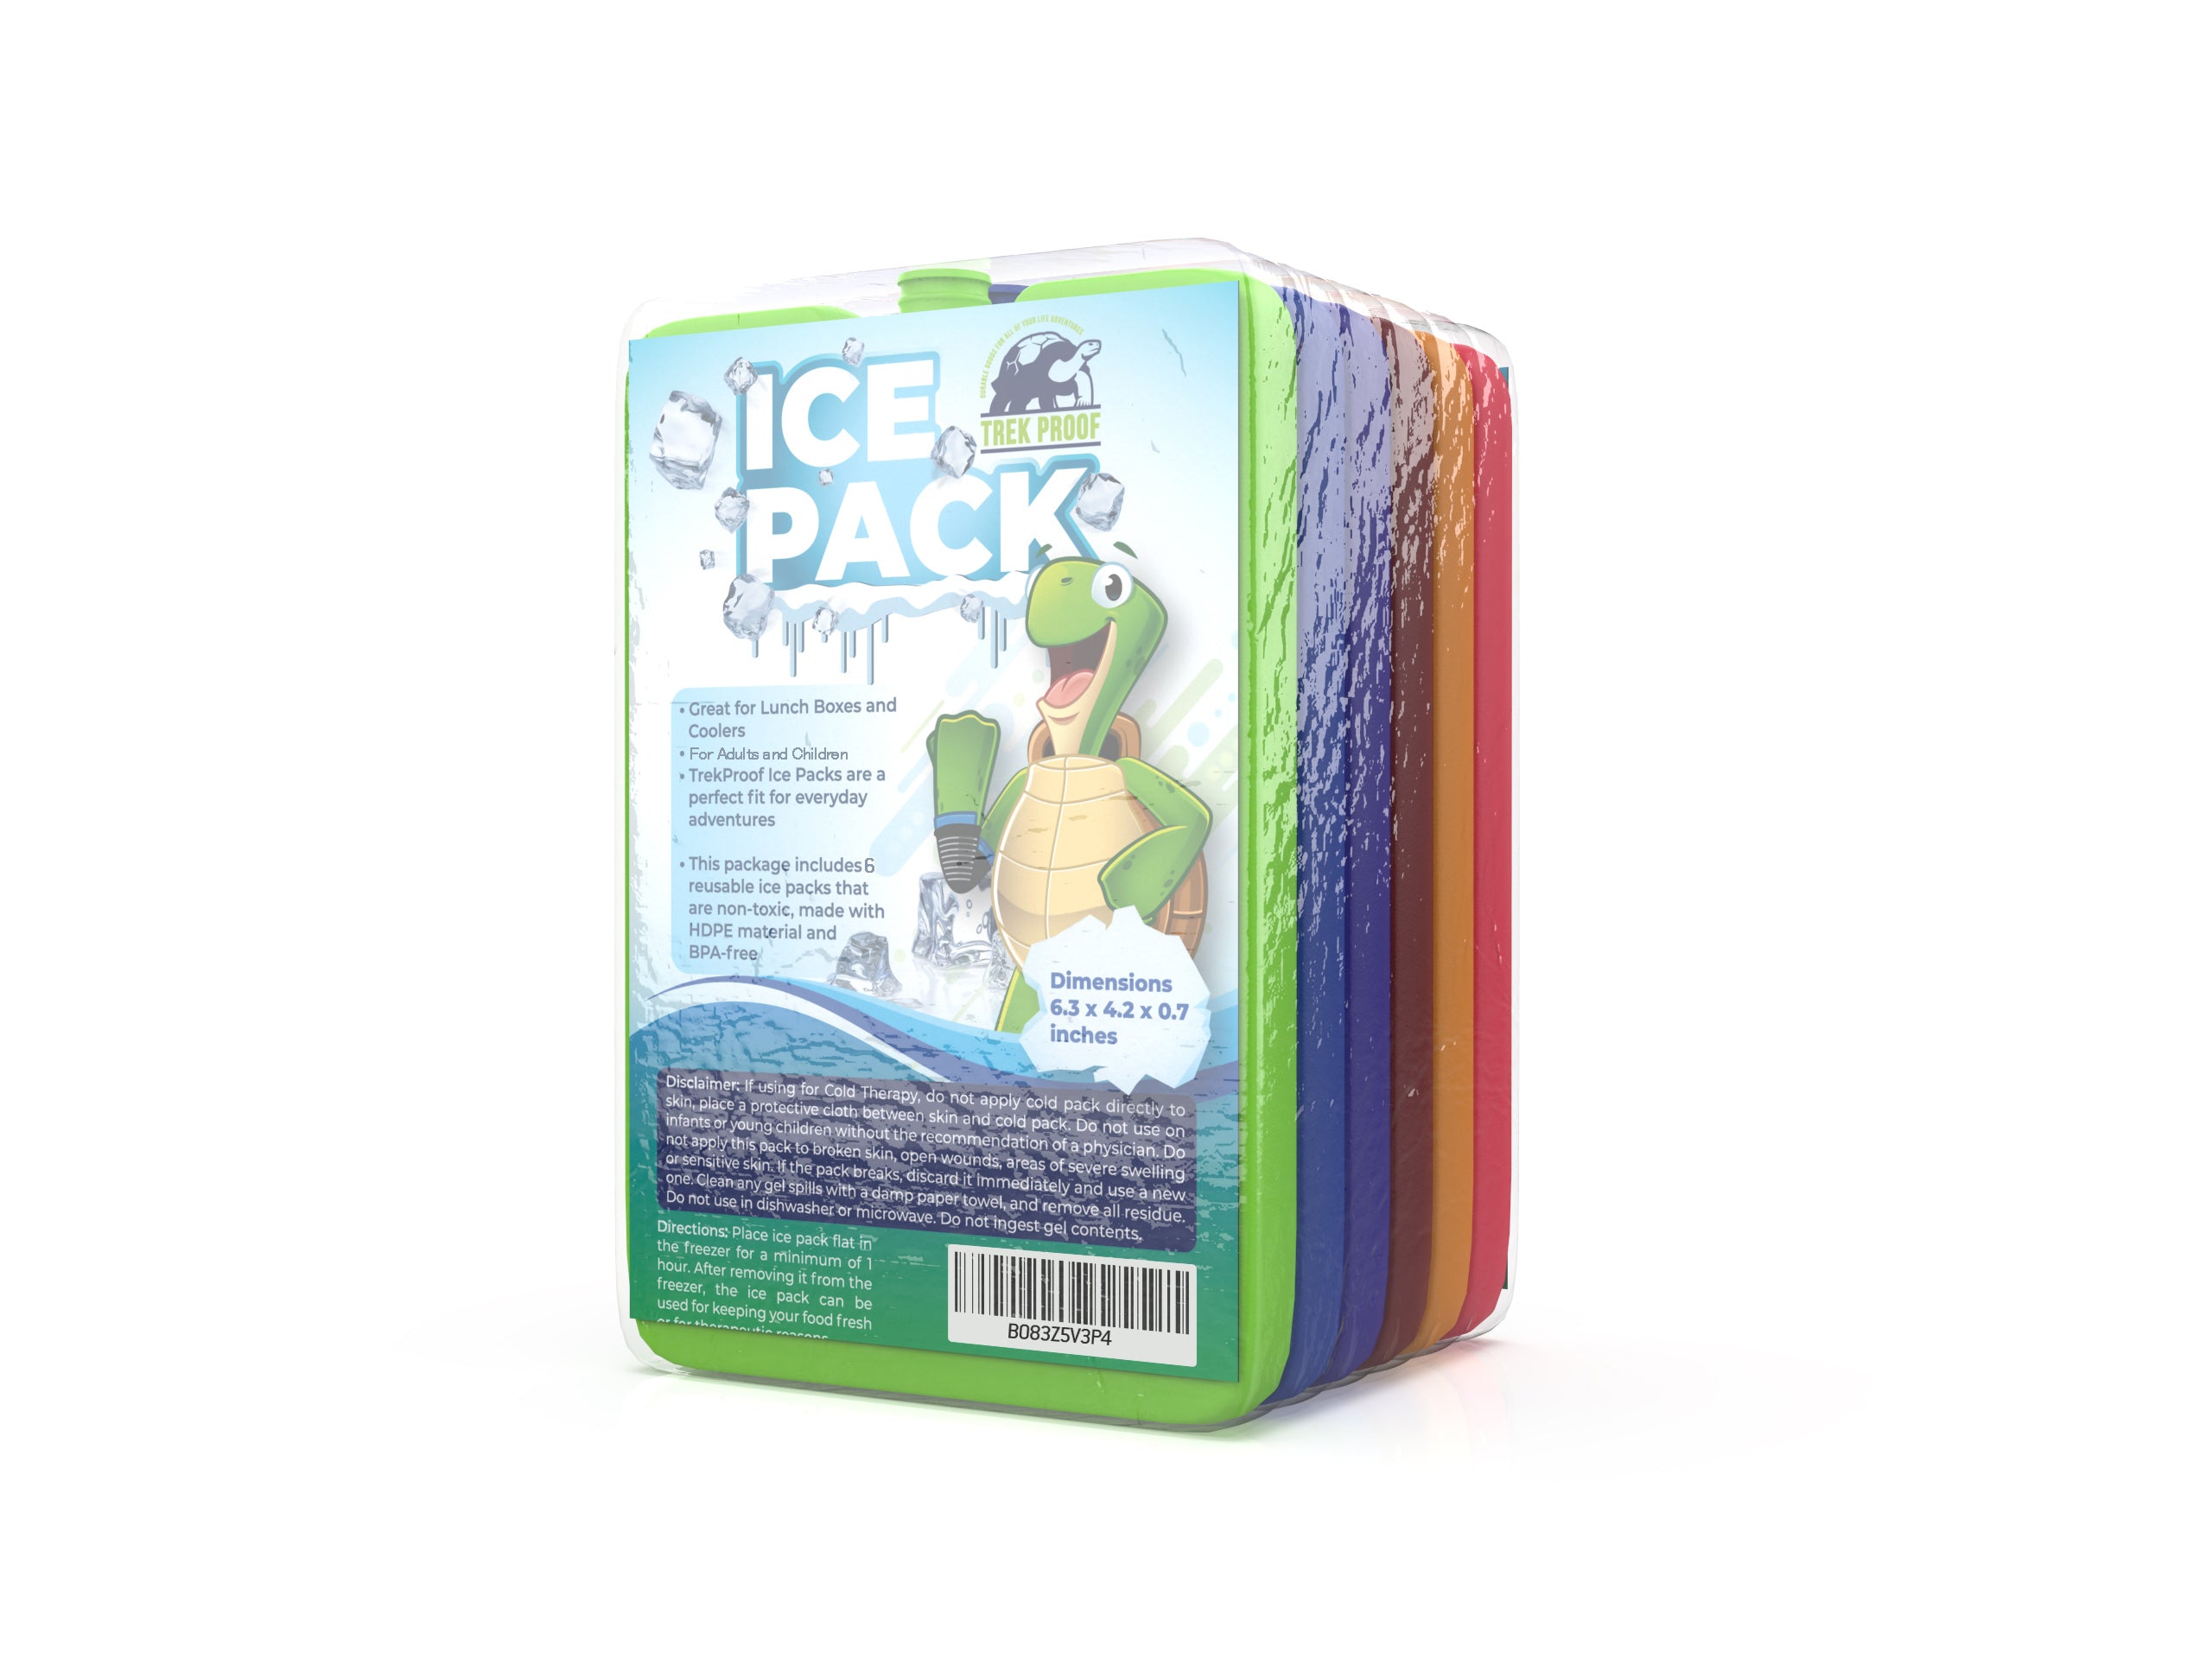  Monkey Business Kids Ice Packs For Lunch Box/Lunch Ice Packs  Reusable/Slim Ice Packs Perfect For Your Kid's Lunch Box/Fun Freezer Packs  Your Kids Will Love (Cub Pack of 4) : Sports